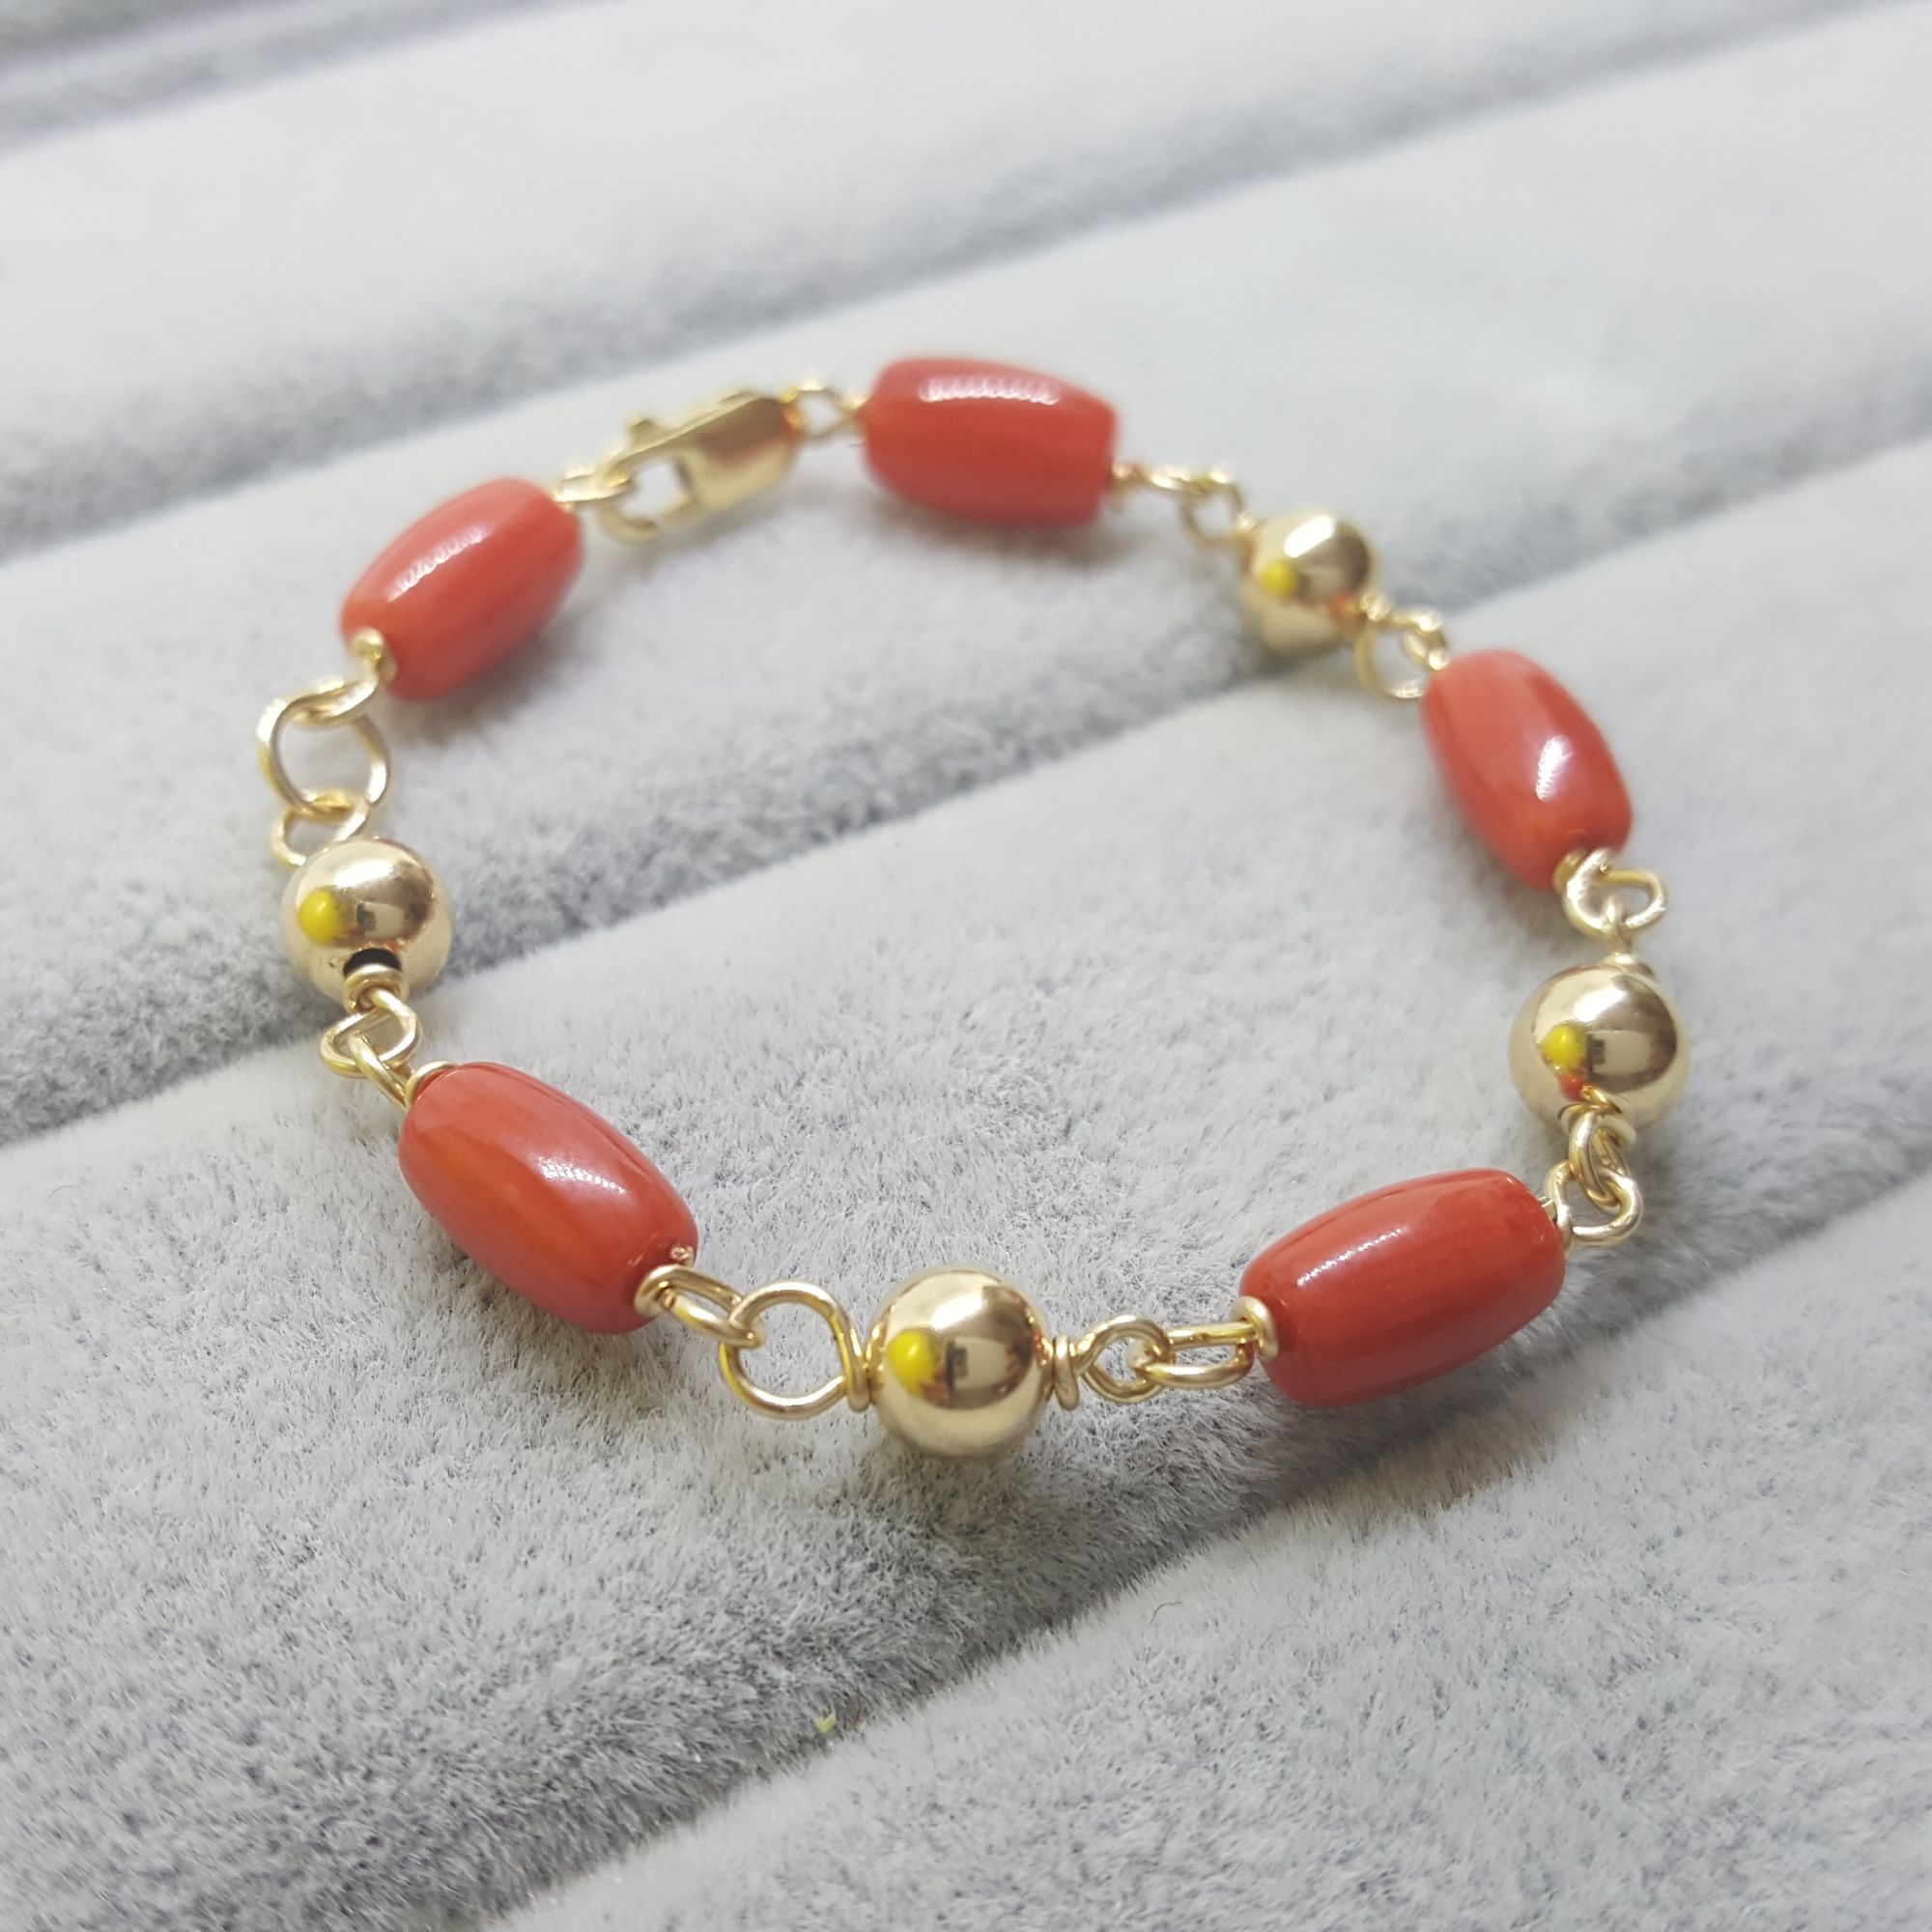 Jewels Fiji  18Kt Yellow Gold Baby Bracelet With Genuine Red Coral  Available At Jewels Fiji   Facebook